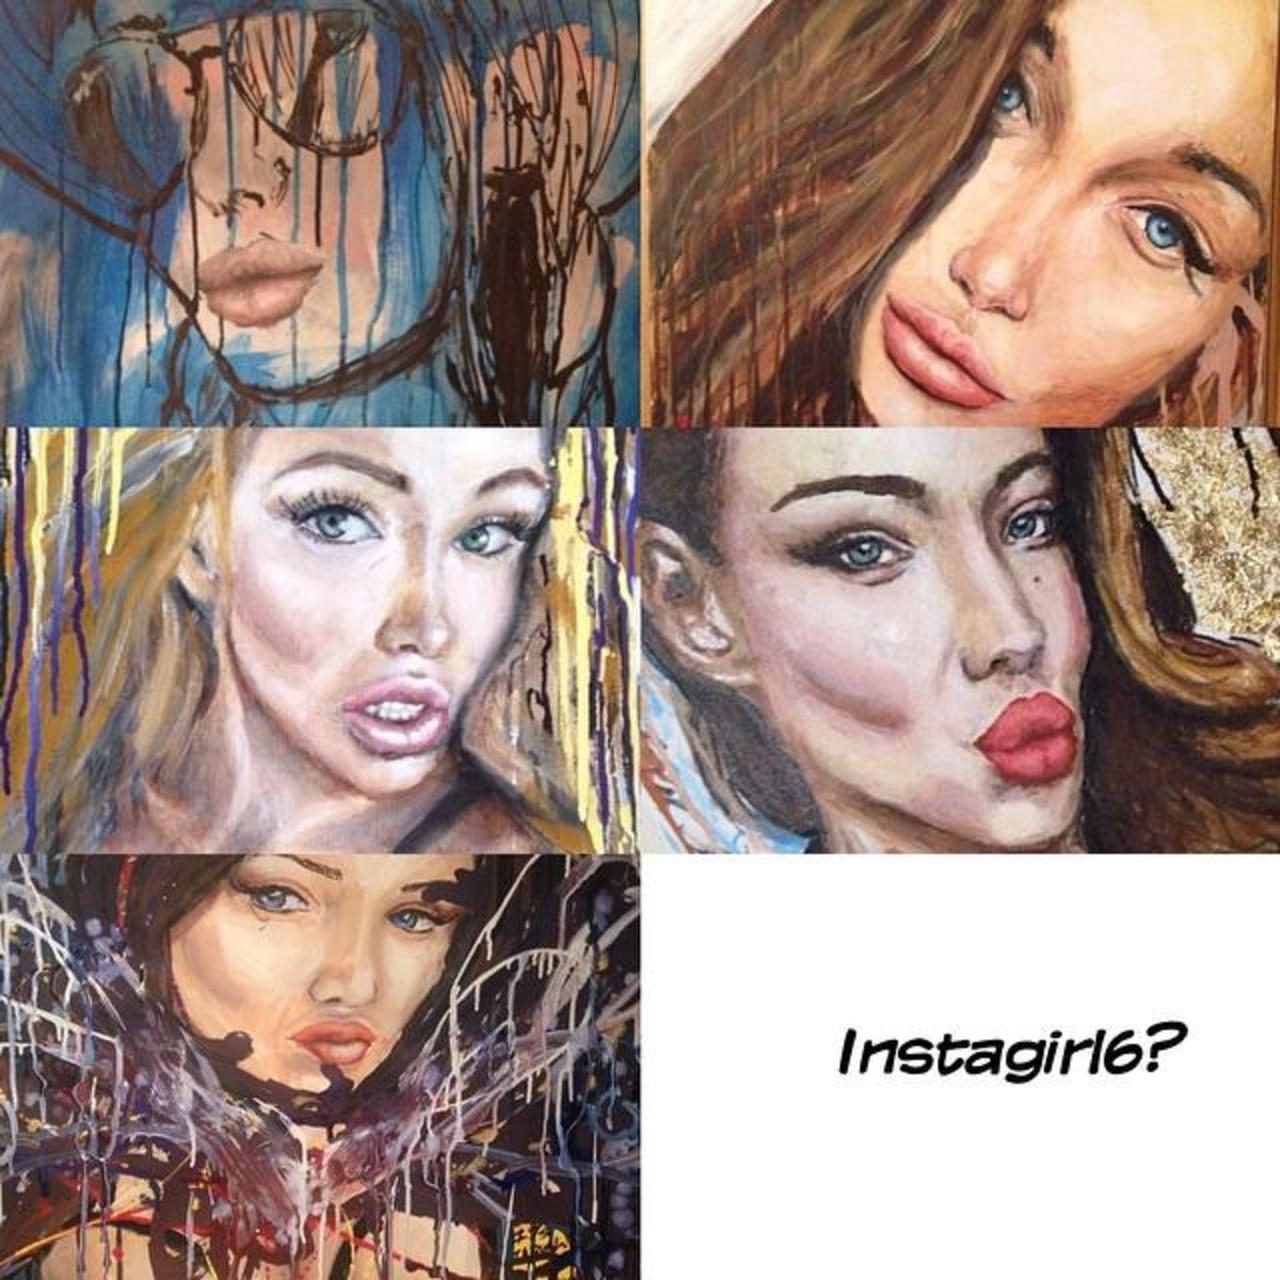 So who's the muse for my instagirl6 portrait? Hmm...
#art #portraitpainting #elle #streetart #hiphop #graffiti #gra… http://t.co/xy71Q0095S